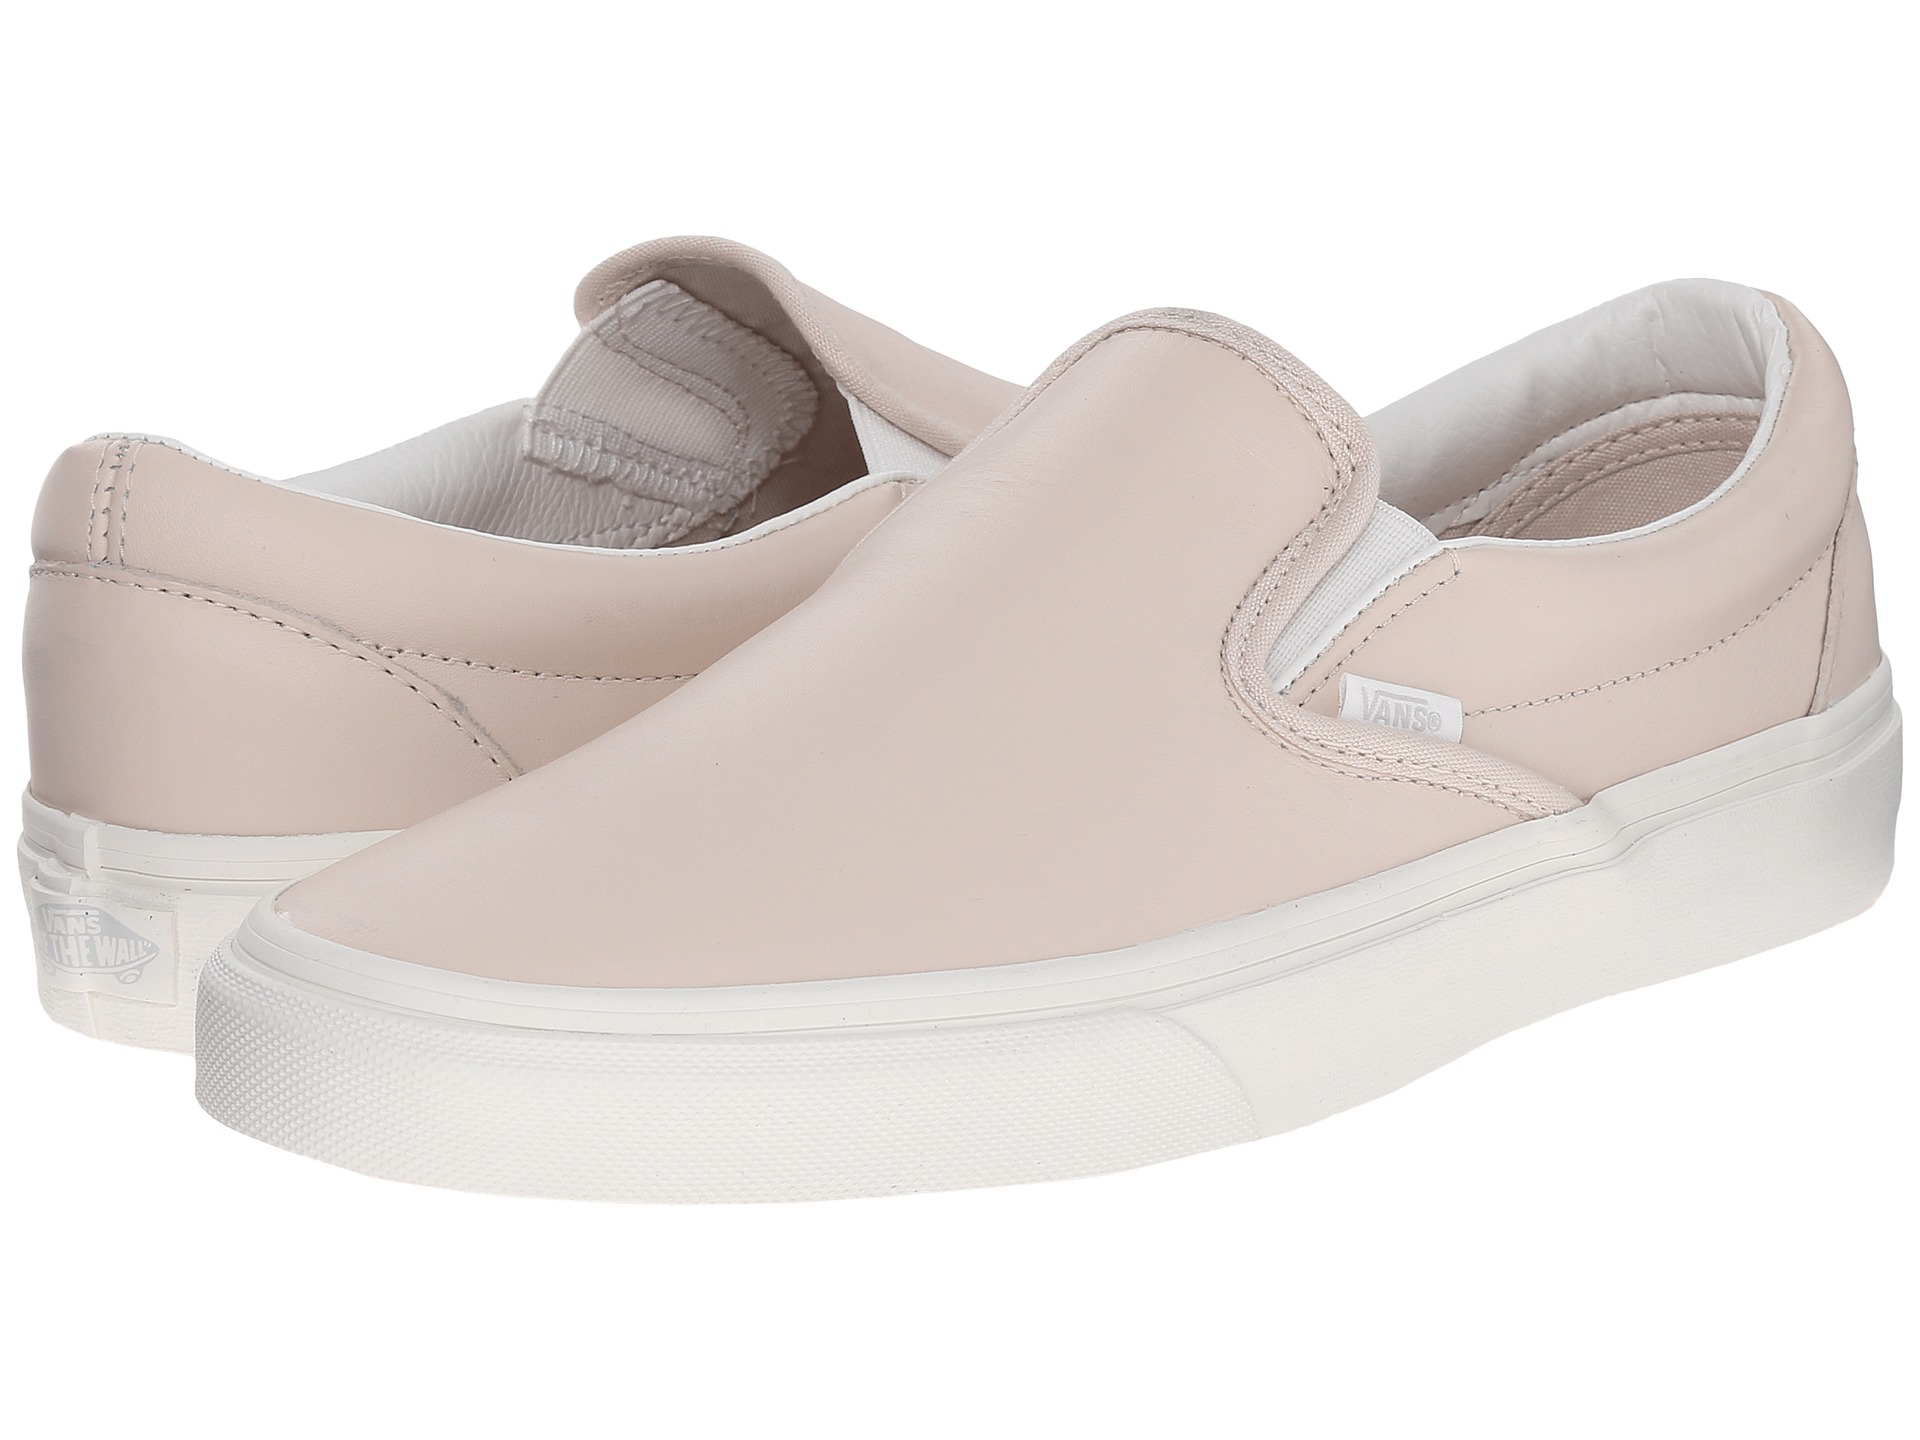 Shop > slip on pink > at lowest prices